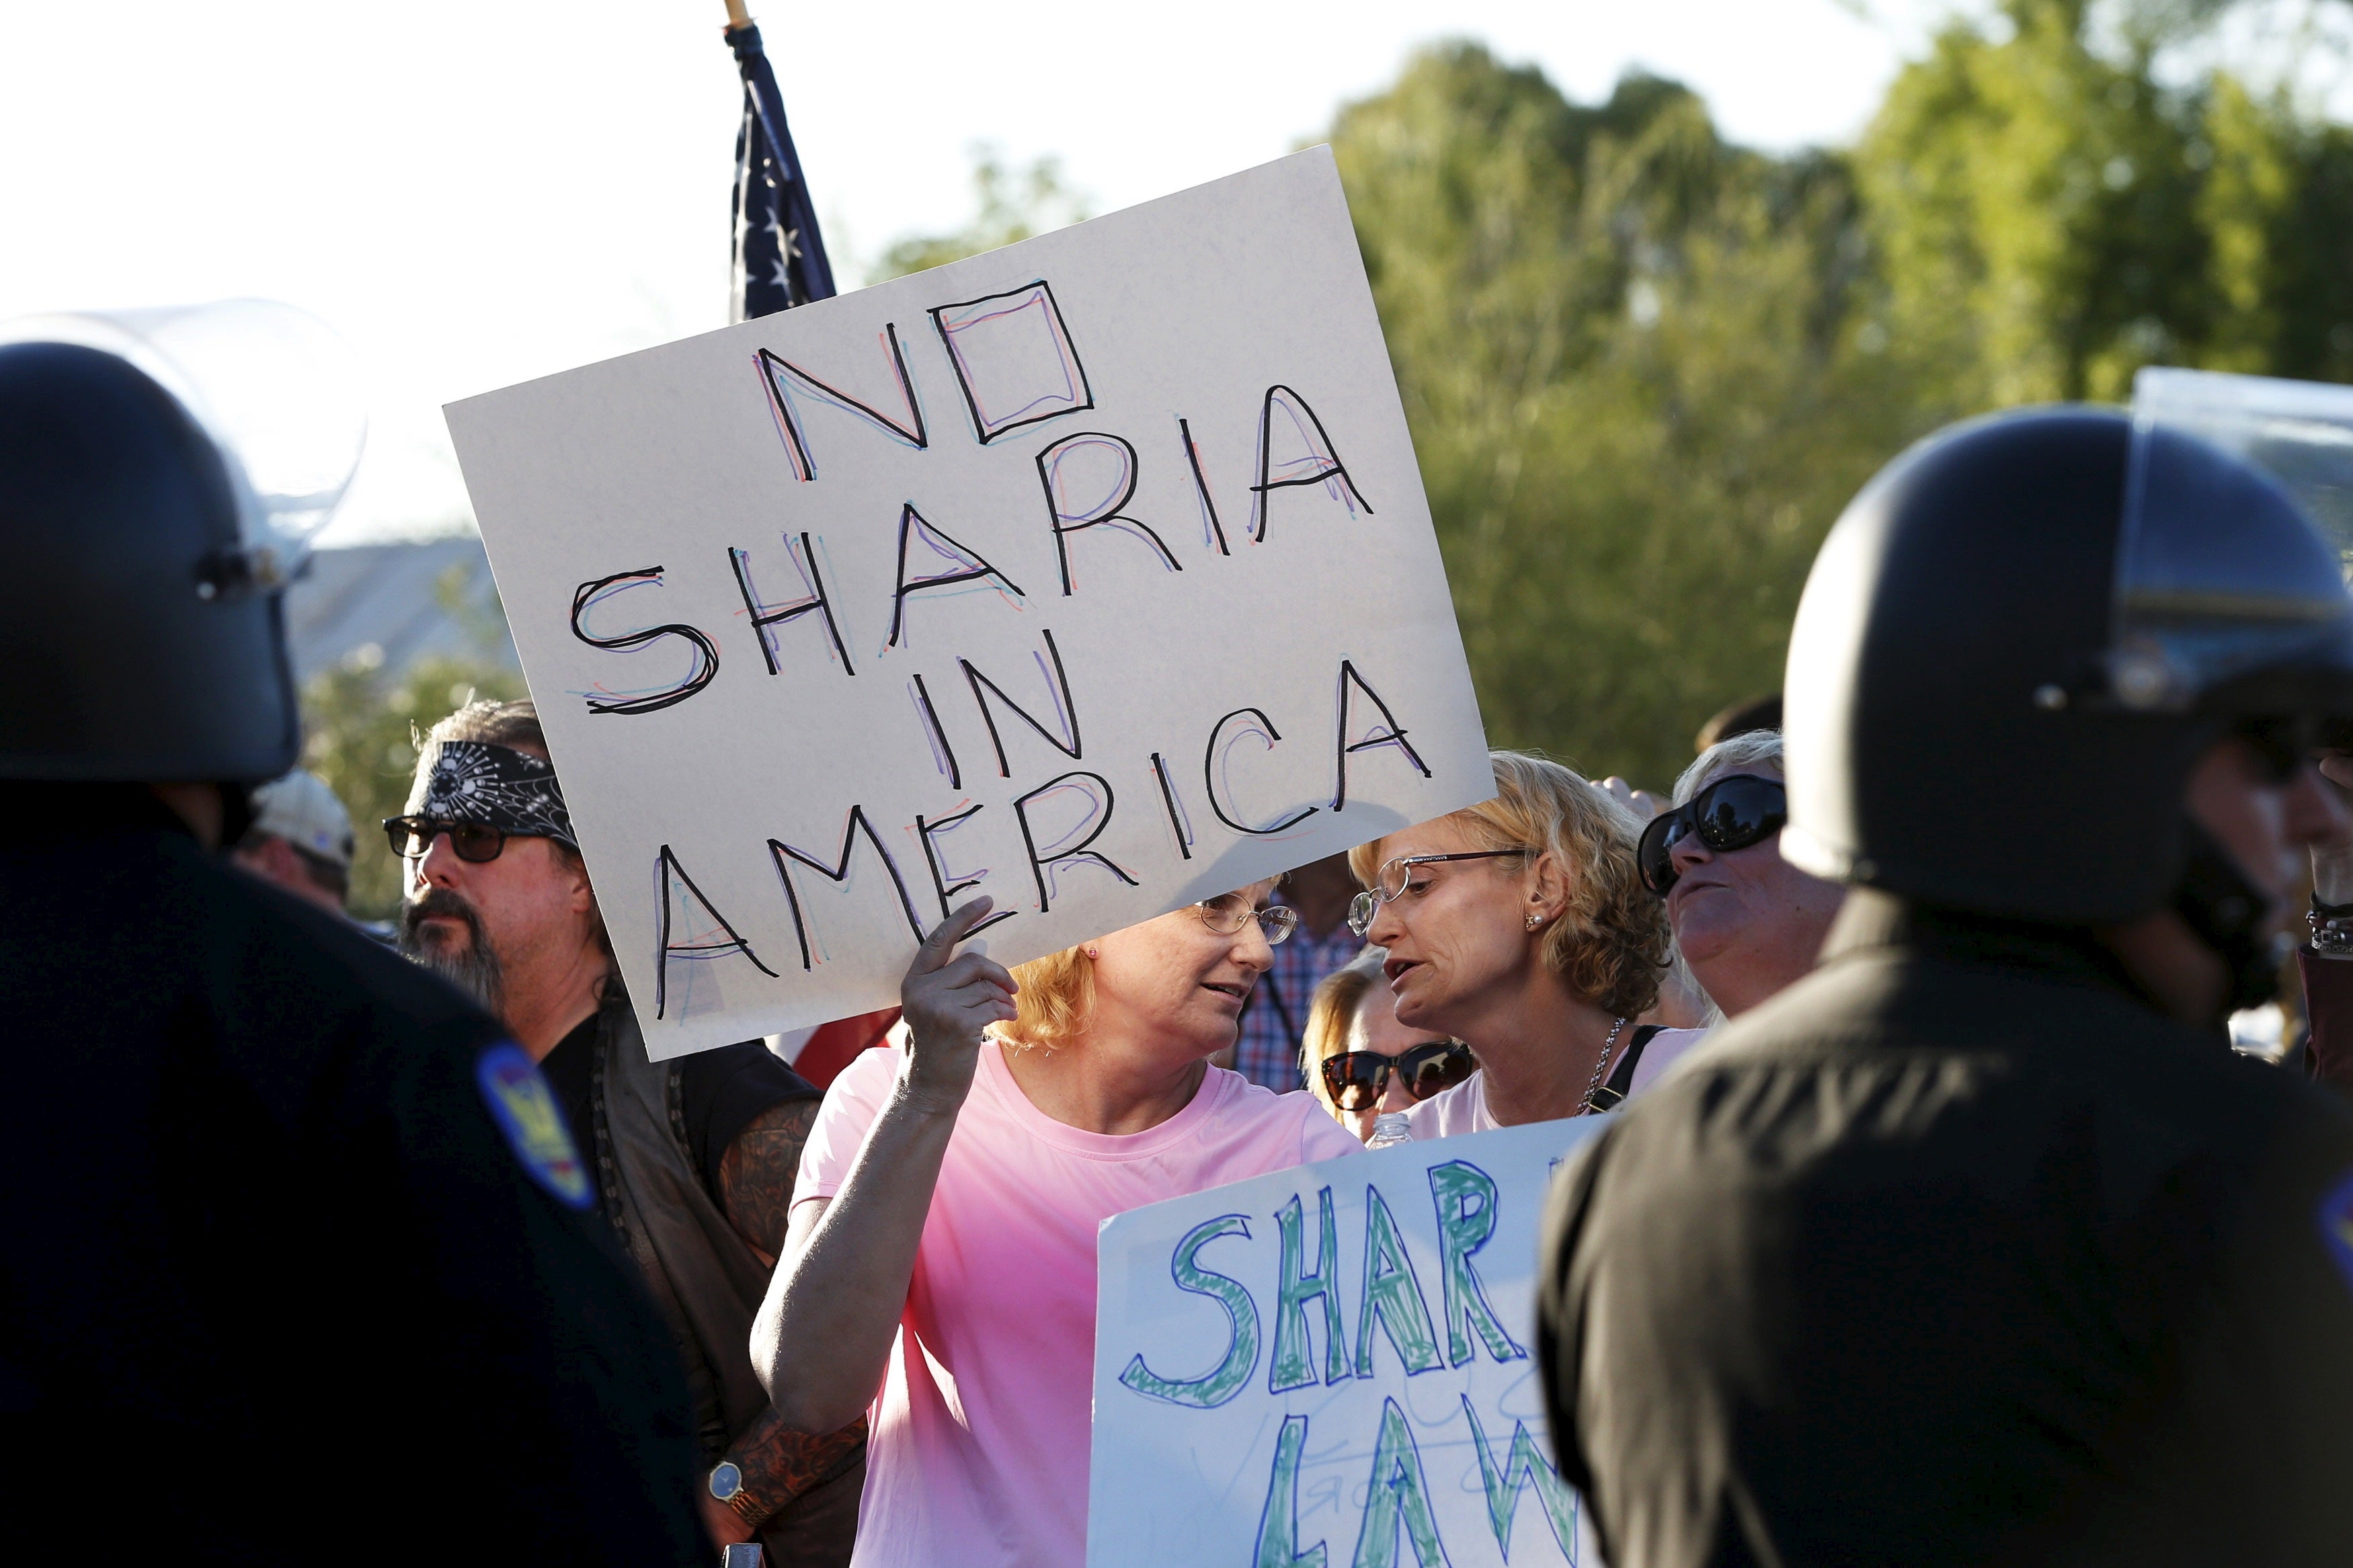 Women attend a "Freedom of Speech Rally Round II" across the street from the Islamic Community Center in Phoenix, Arizona May 29, 2015. More than 200 protesters, some armed, berated Islam and its Prophet Mohammed outside an Arizona mosque on Friday in a provocative protest that was denounced by counterprotesters shouting "Go home, Nazis," weeks after an anti-Muslim event in Texas came under attack by two gunmen.